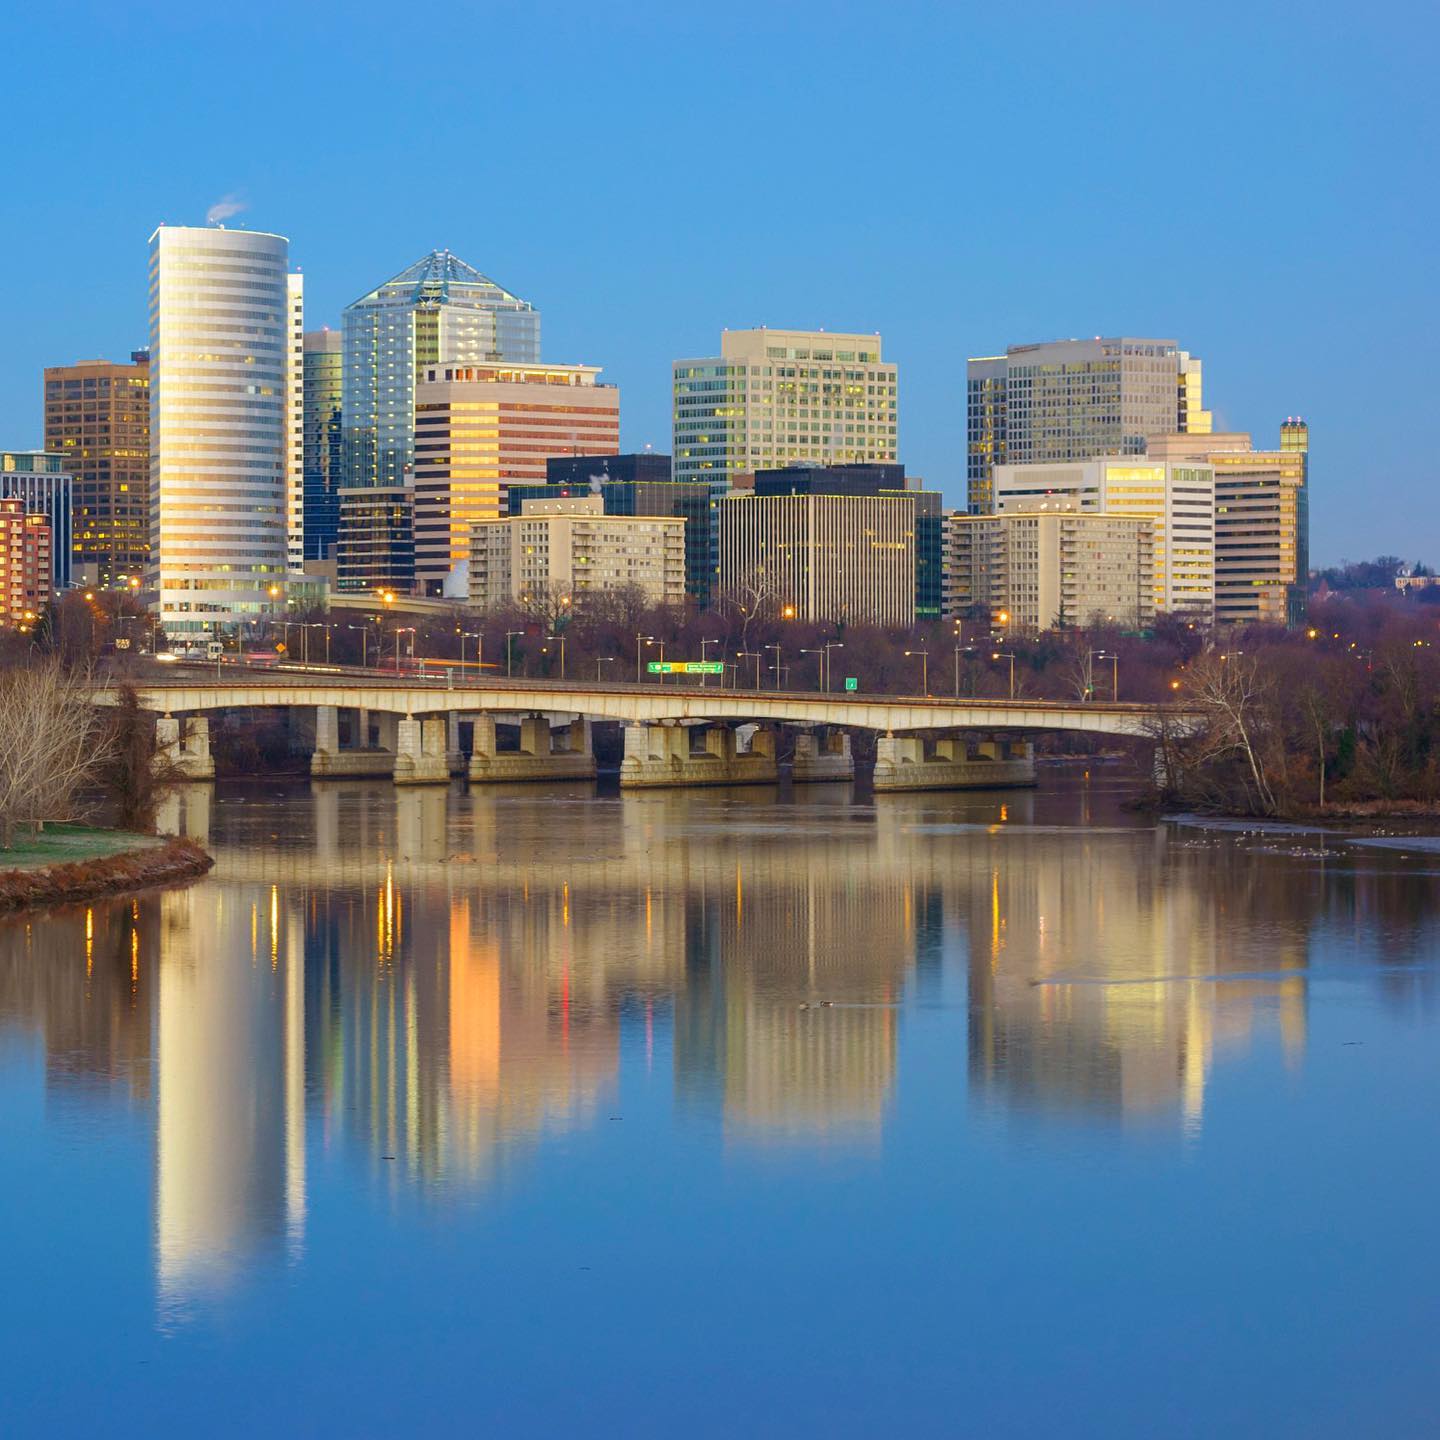 A view of the Arlington cityscape as seen reflected in the waters of the Potomac River. Photo by Instagram user @carlitosevilchis.